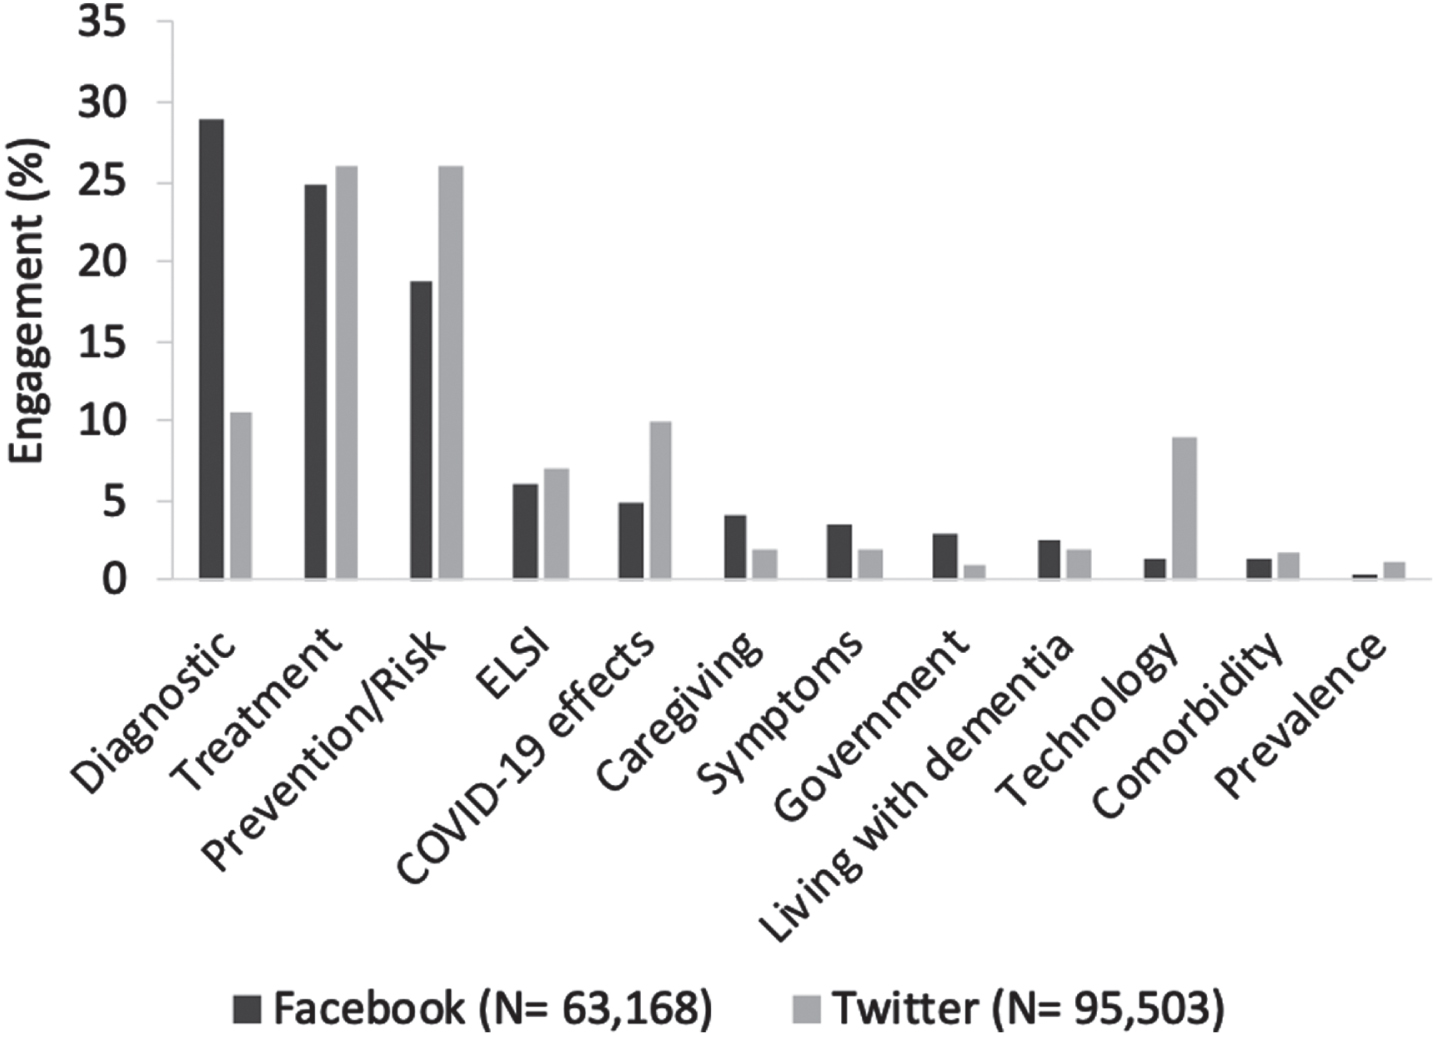 Engagement of aspect of dementia. Percentage of social media engagement for dementia research themes on Facebook and Twitter. Facebook engagement is a sum of reactions, shares, and comments. Twitter engagement is a sum of likes, retweets, replies, and quote tweets. Percentages for each theme are of a total of the N codes indicated for each platform. ELSI, ethical, legal, and social issues.